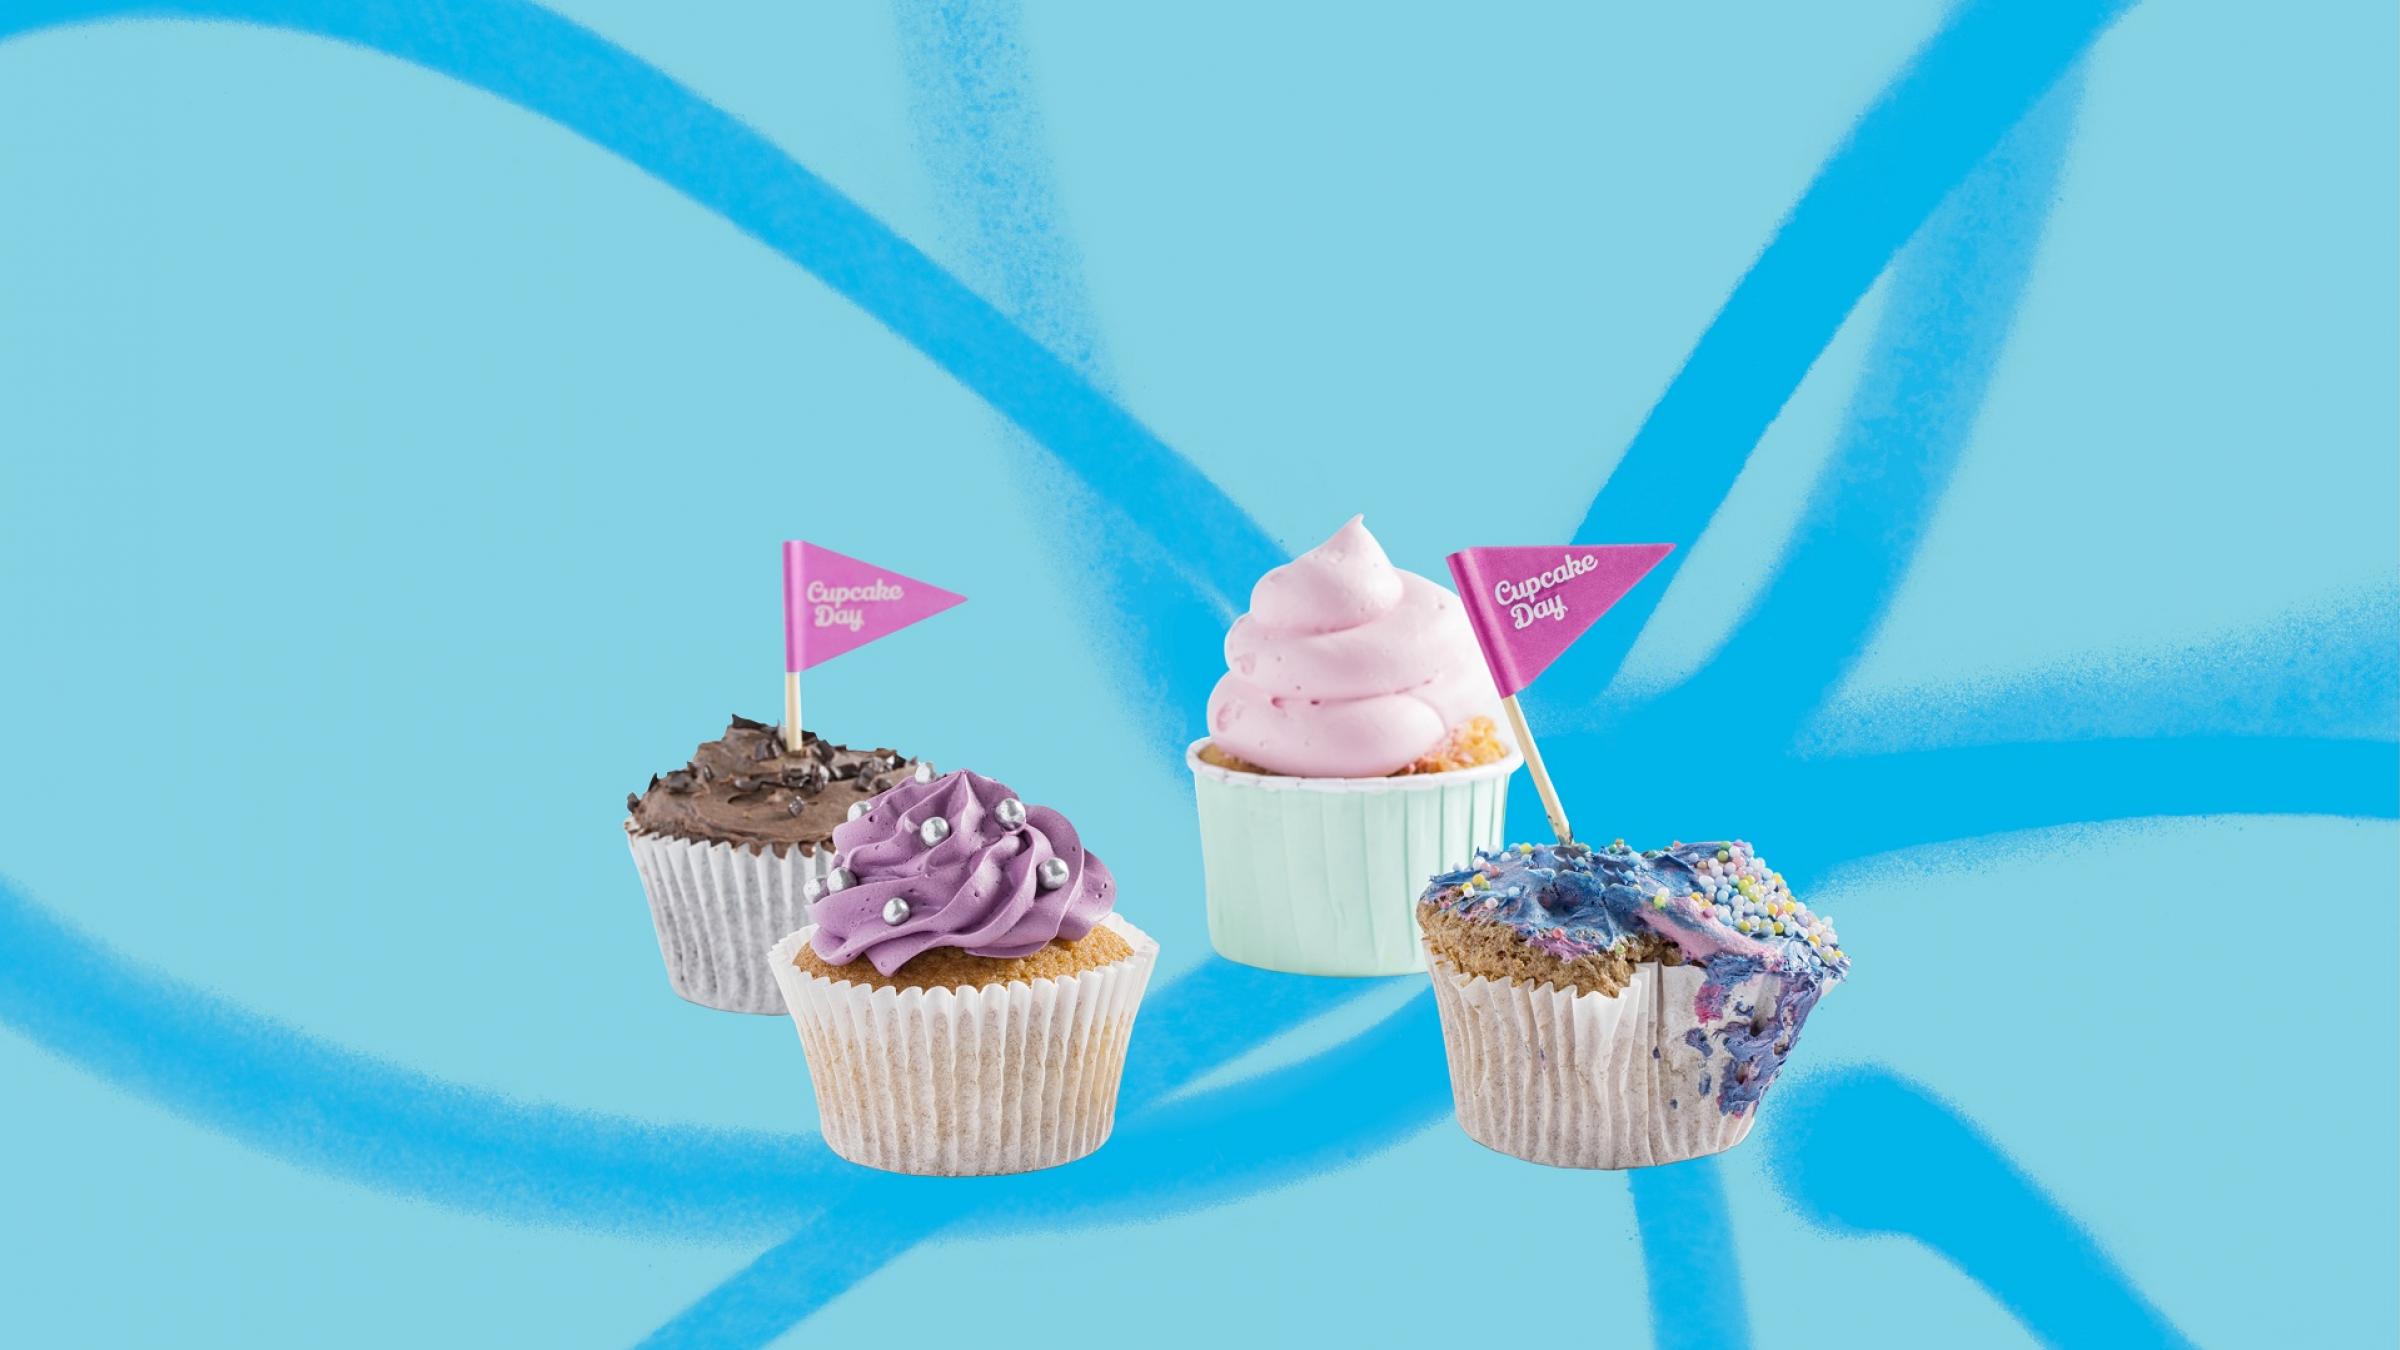 Four cupcakes on a blue background with forget-me-not flower graphic